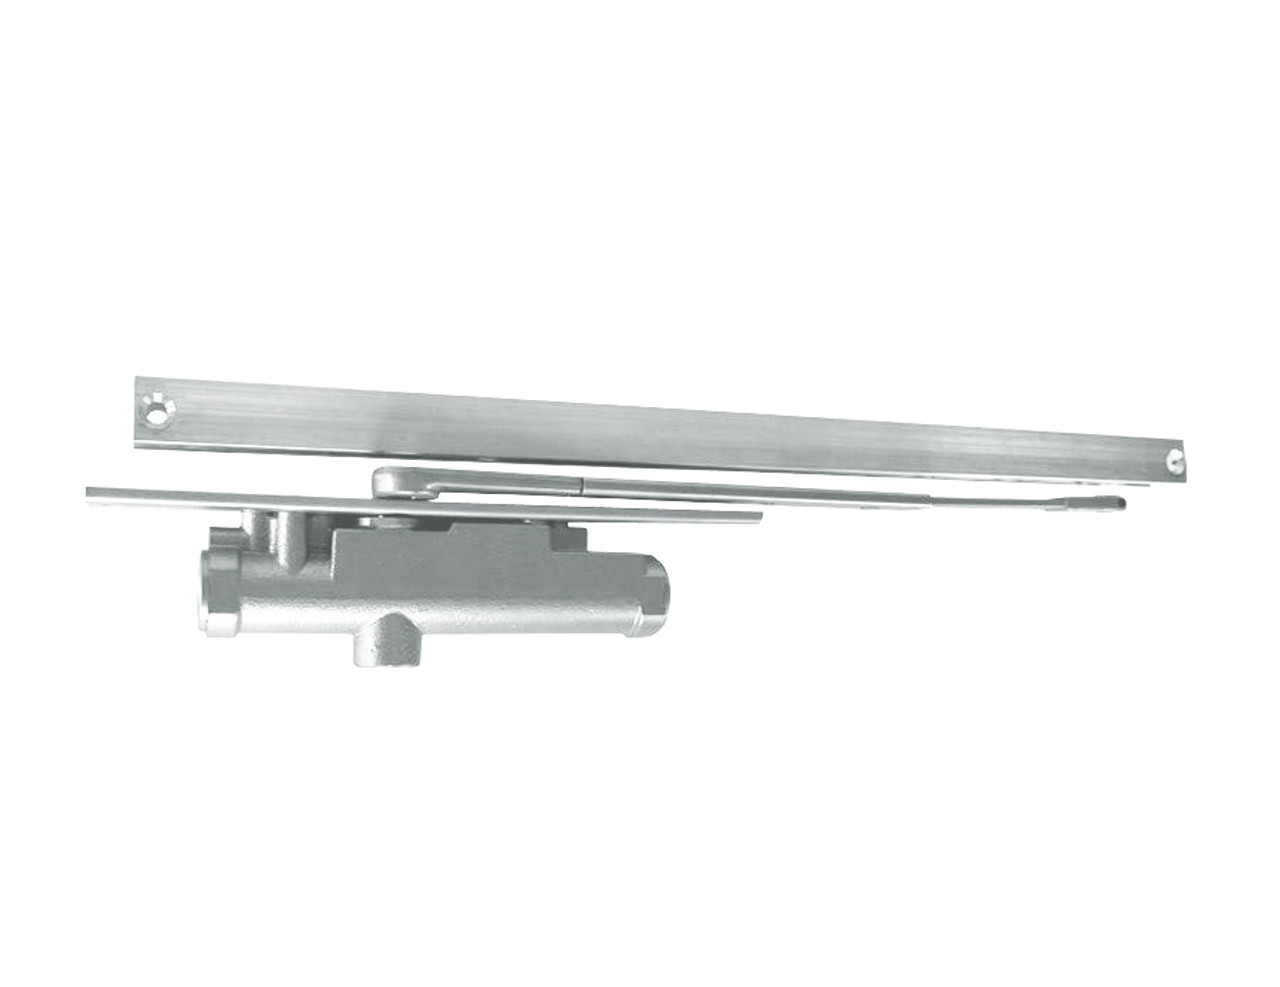 3132-H-Bumper-RH-US26D LCN Door Closer Hold Open Track with Bumper in Satin Chrome Finish